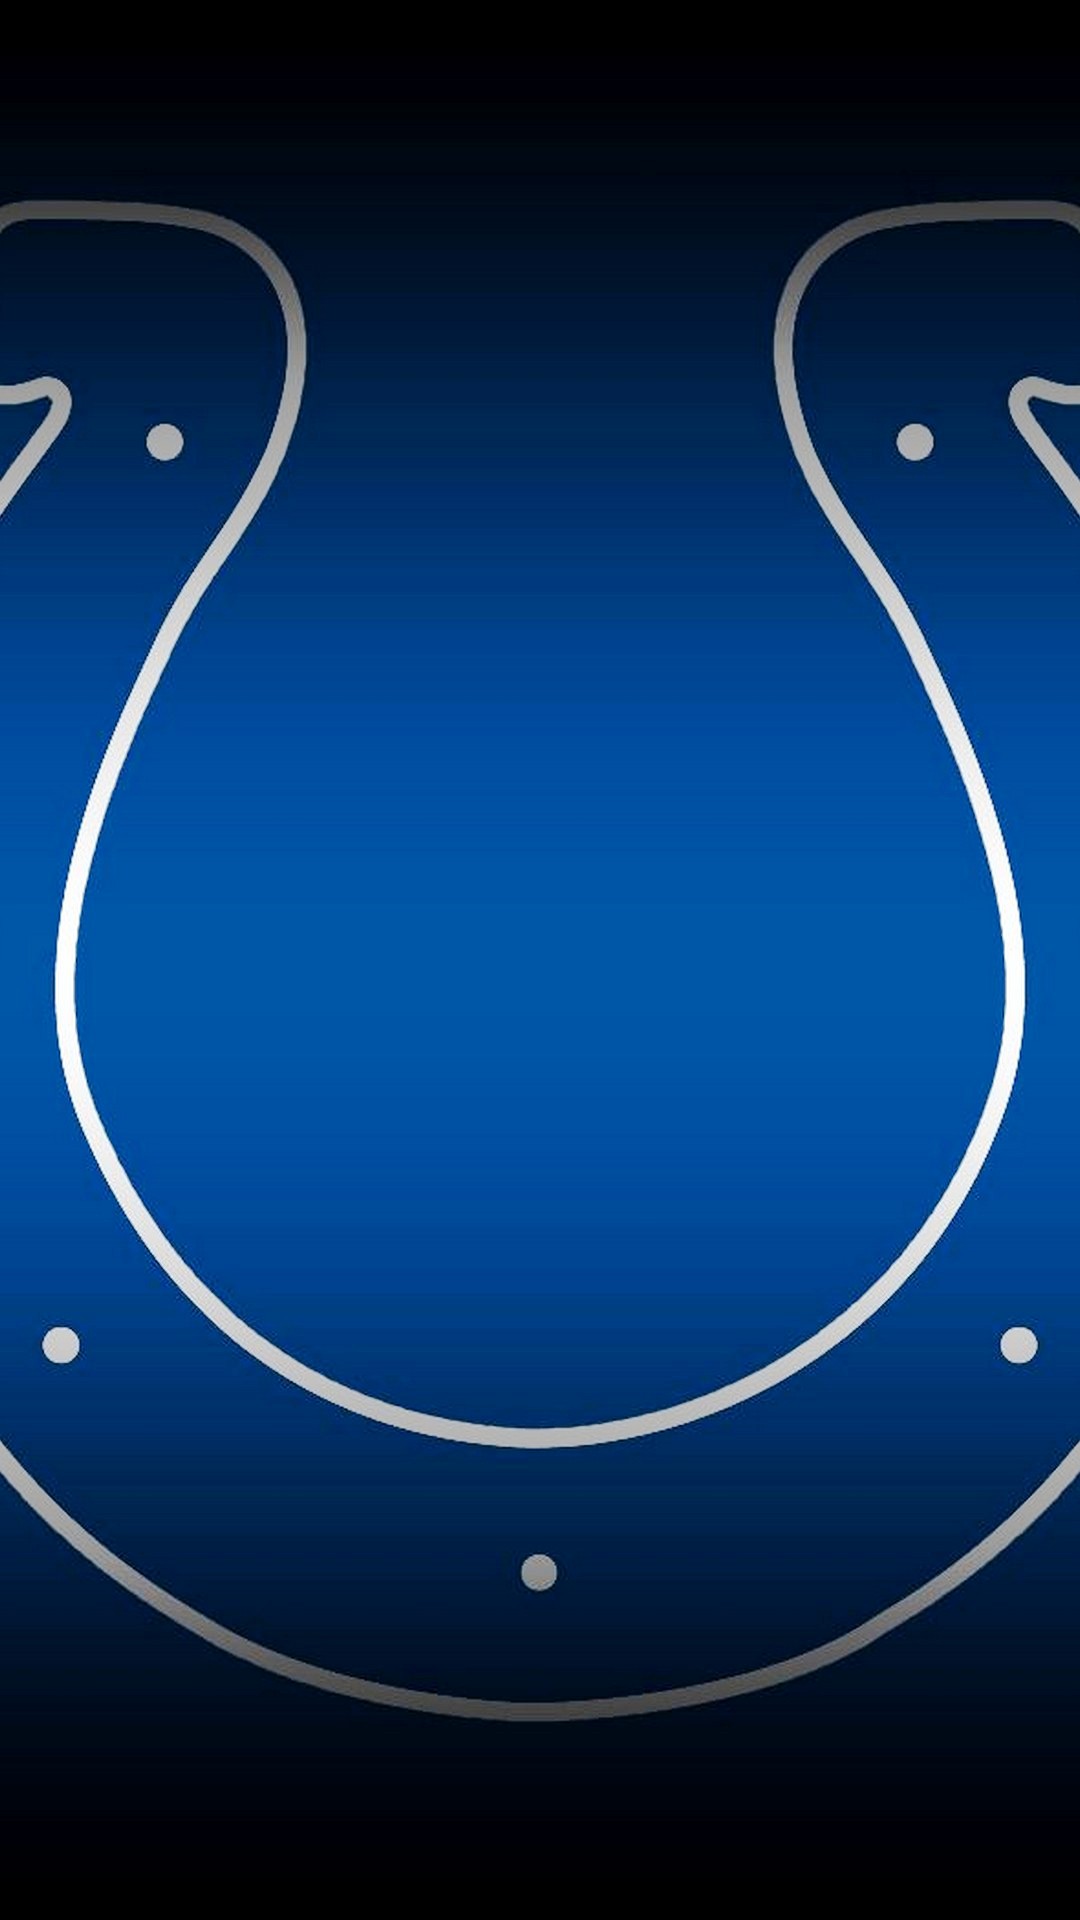 Indianapolis Colts NFL iPhone Wallpaper Size with high-resolution 1080x1920 pixel. Donwload and set as wallpaper for your iPhone X, iPhone XS home screen backgrounds, XS Max, XR, iPhone8 lock screen wallpaper, iPhone 7, 6, SE and other mobile devices